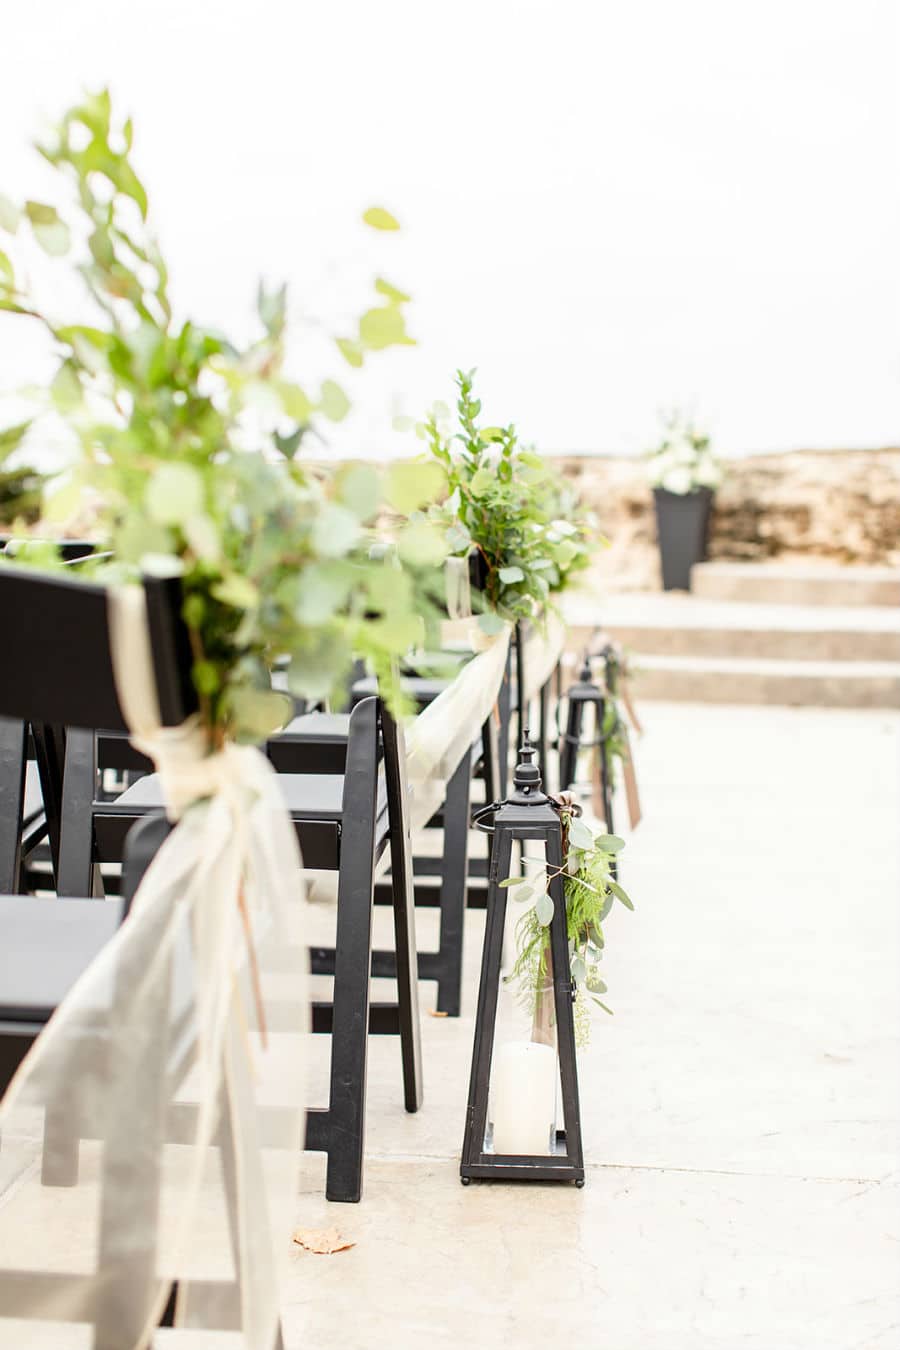 Outdoor seating and aisle